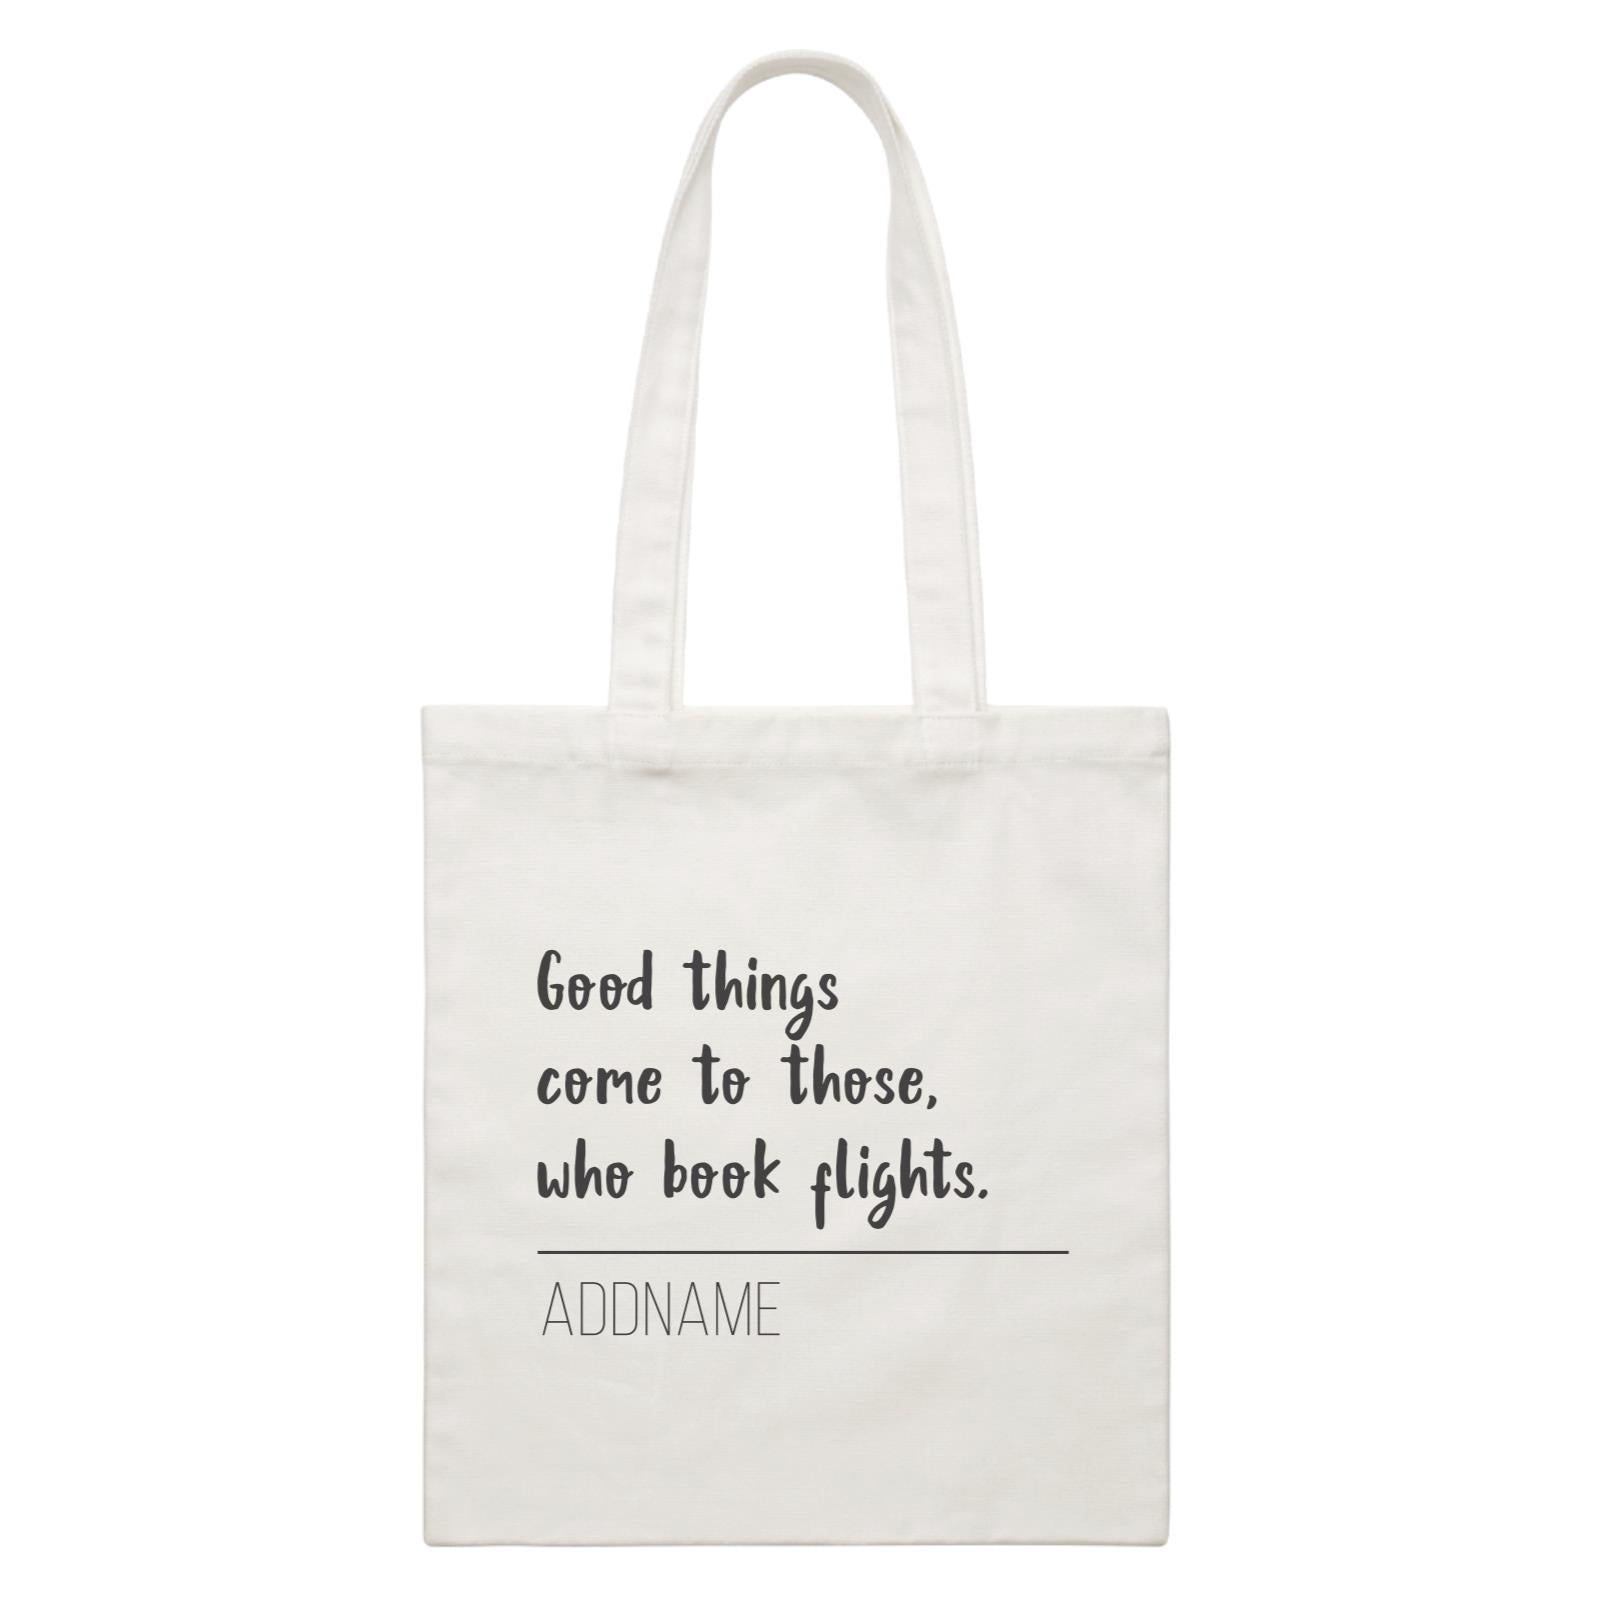 Travel Quotes Good Things Come To Those Who Book Flights Addname White Canvas Bag